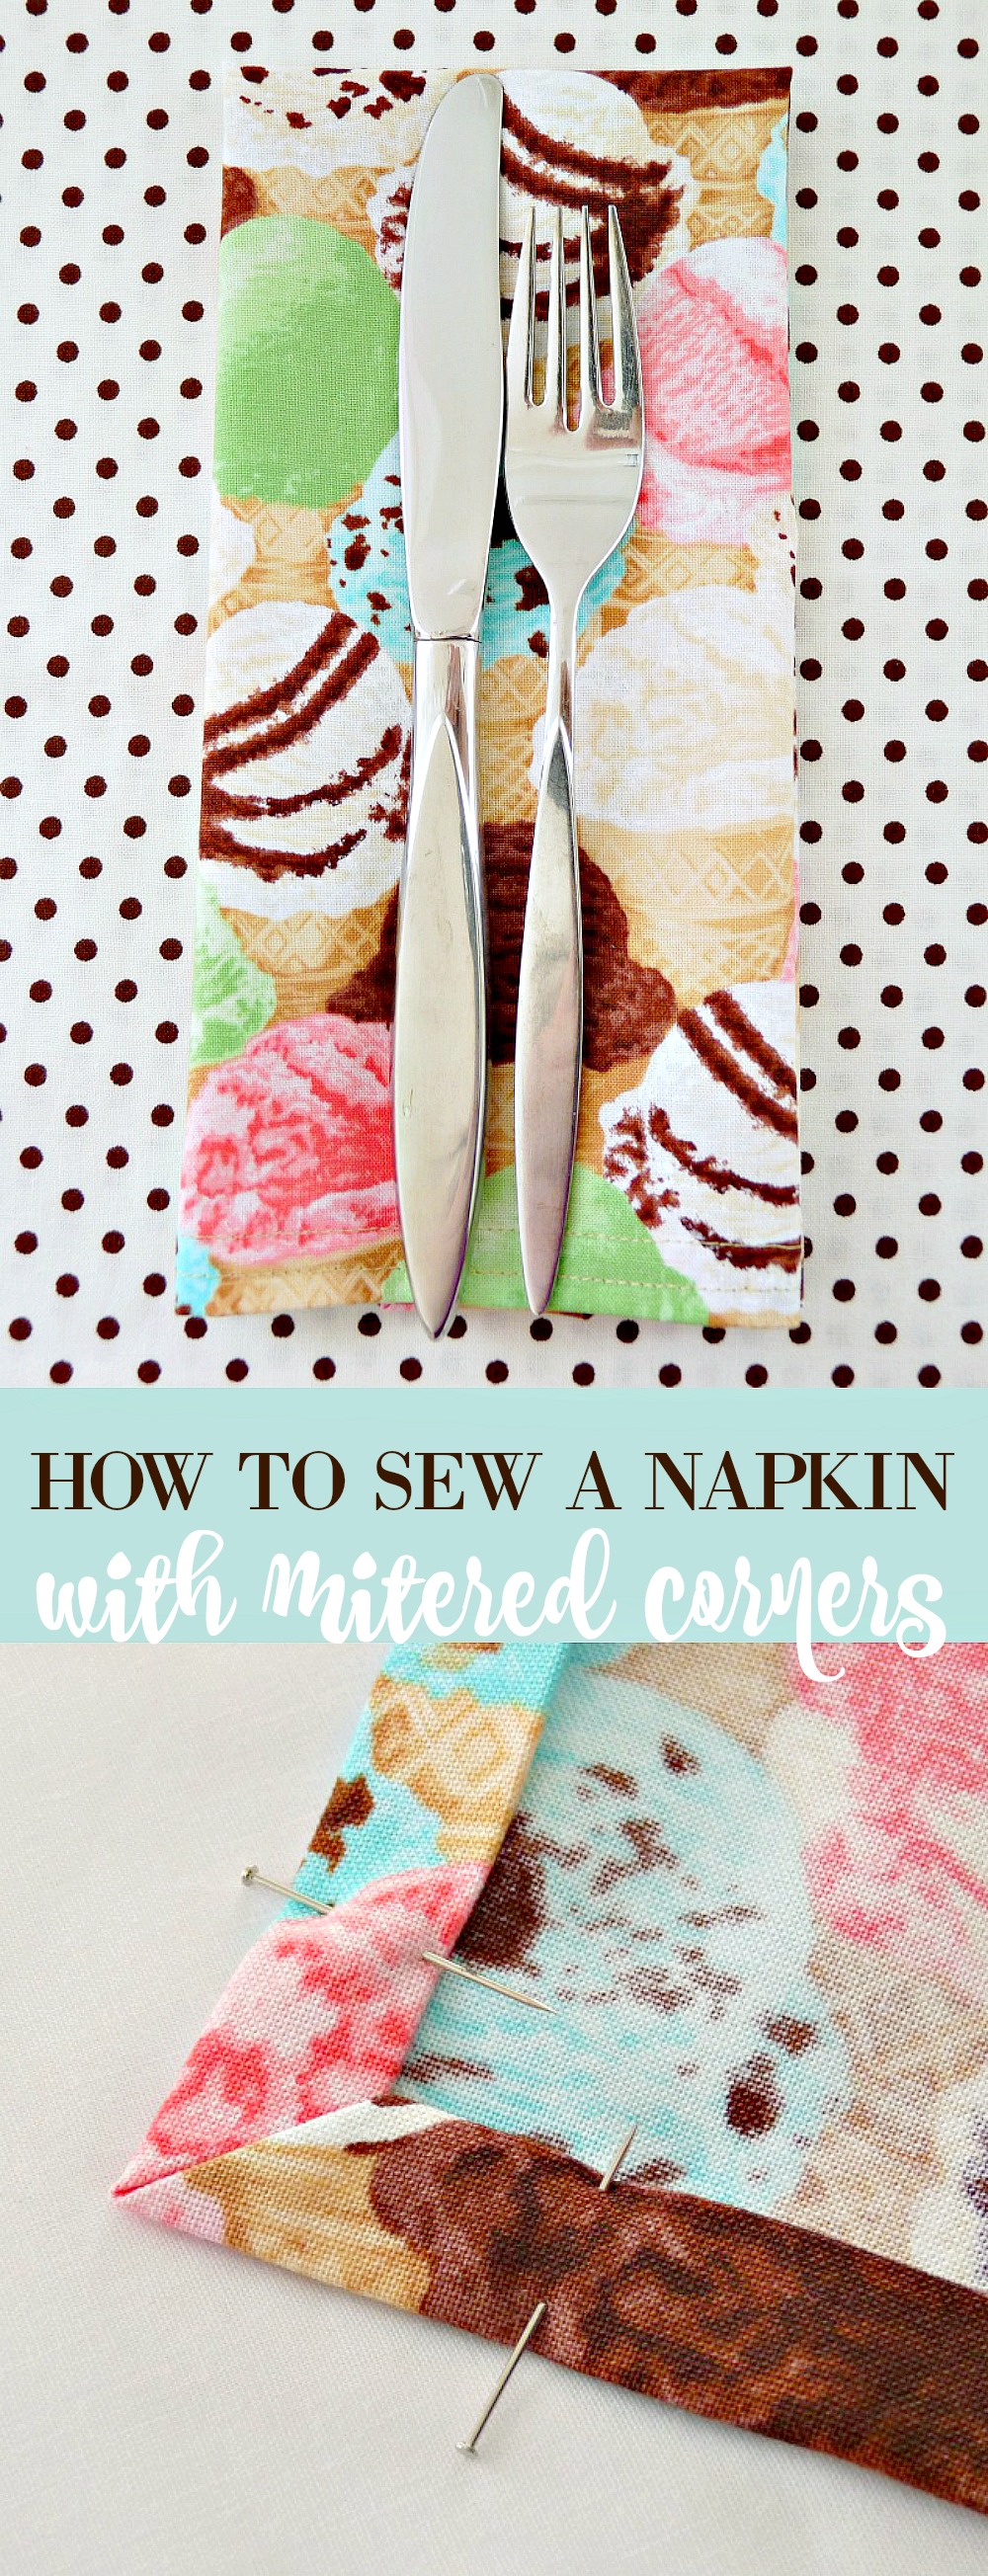 How to sew a mitered corner